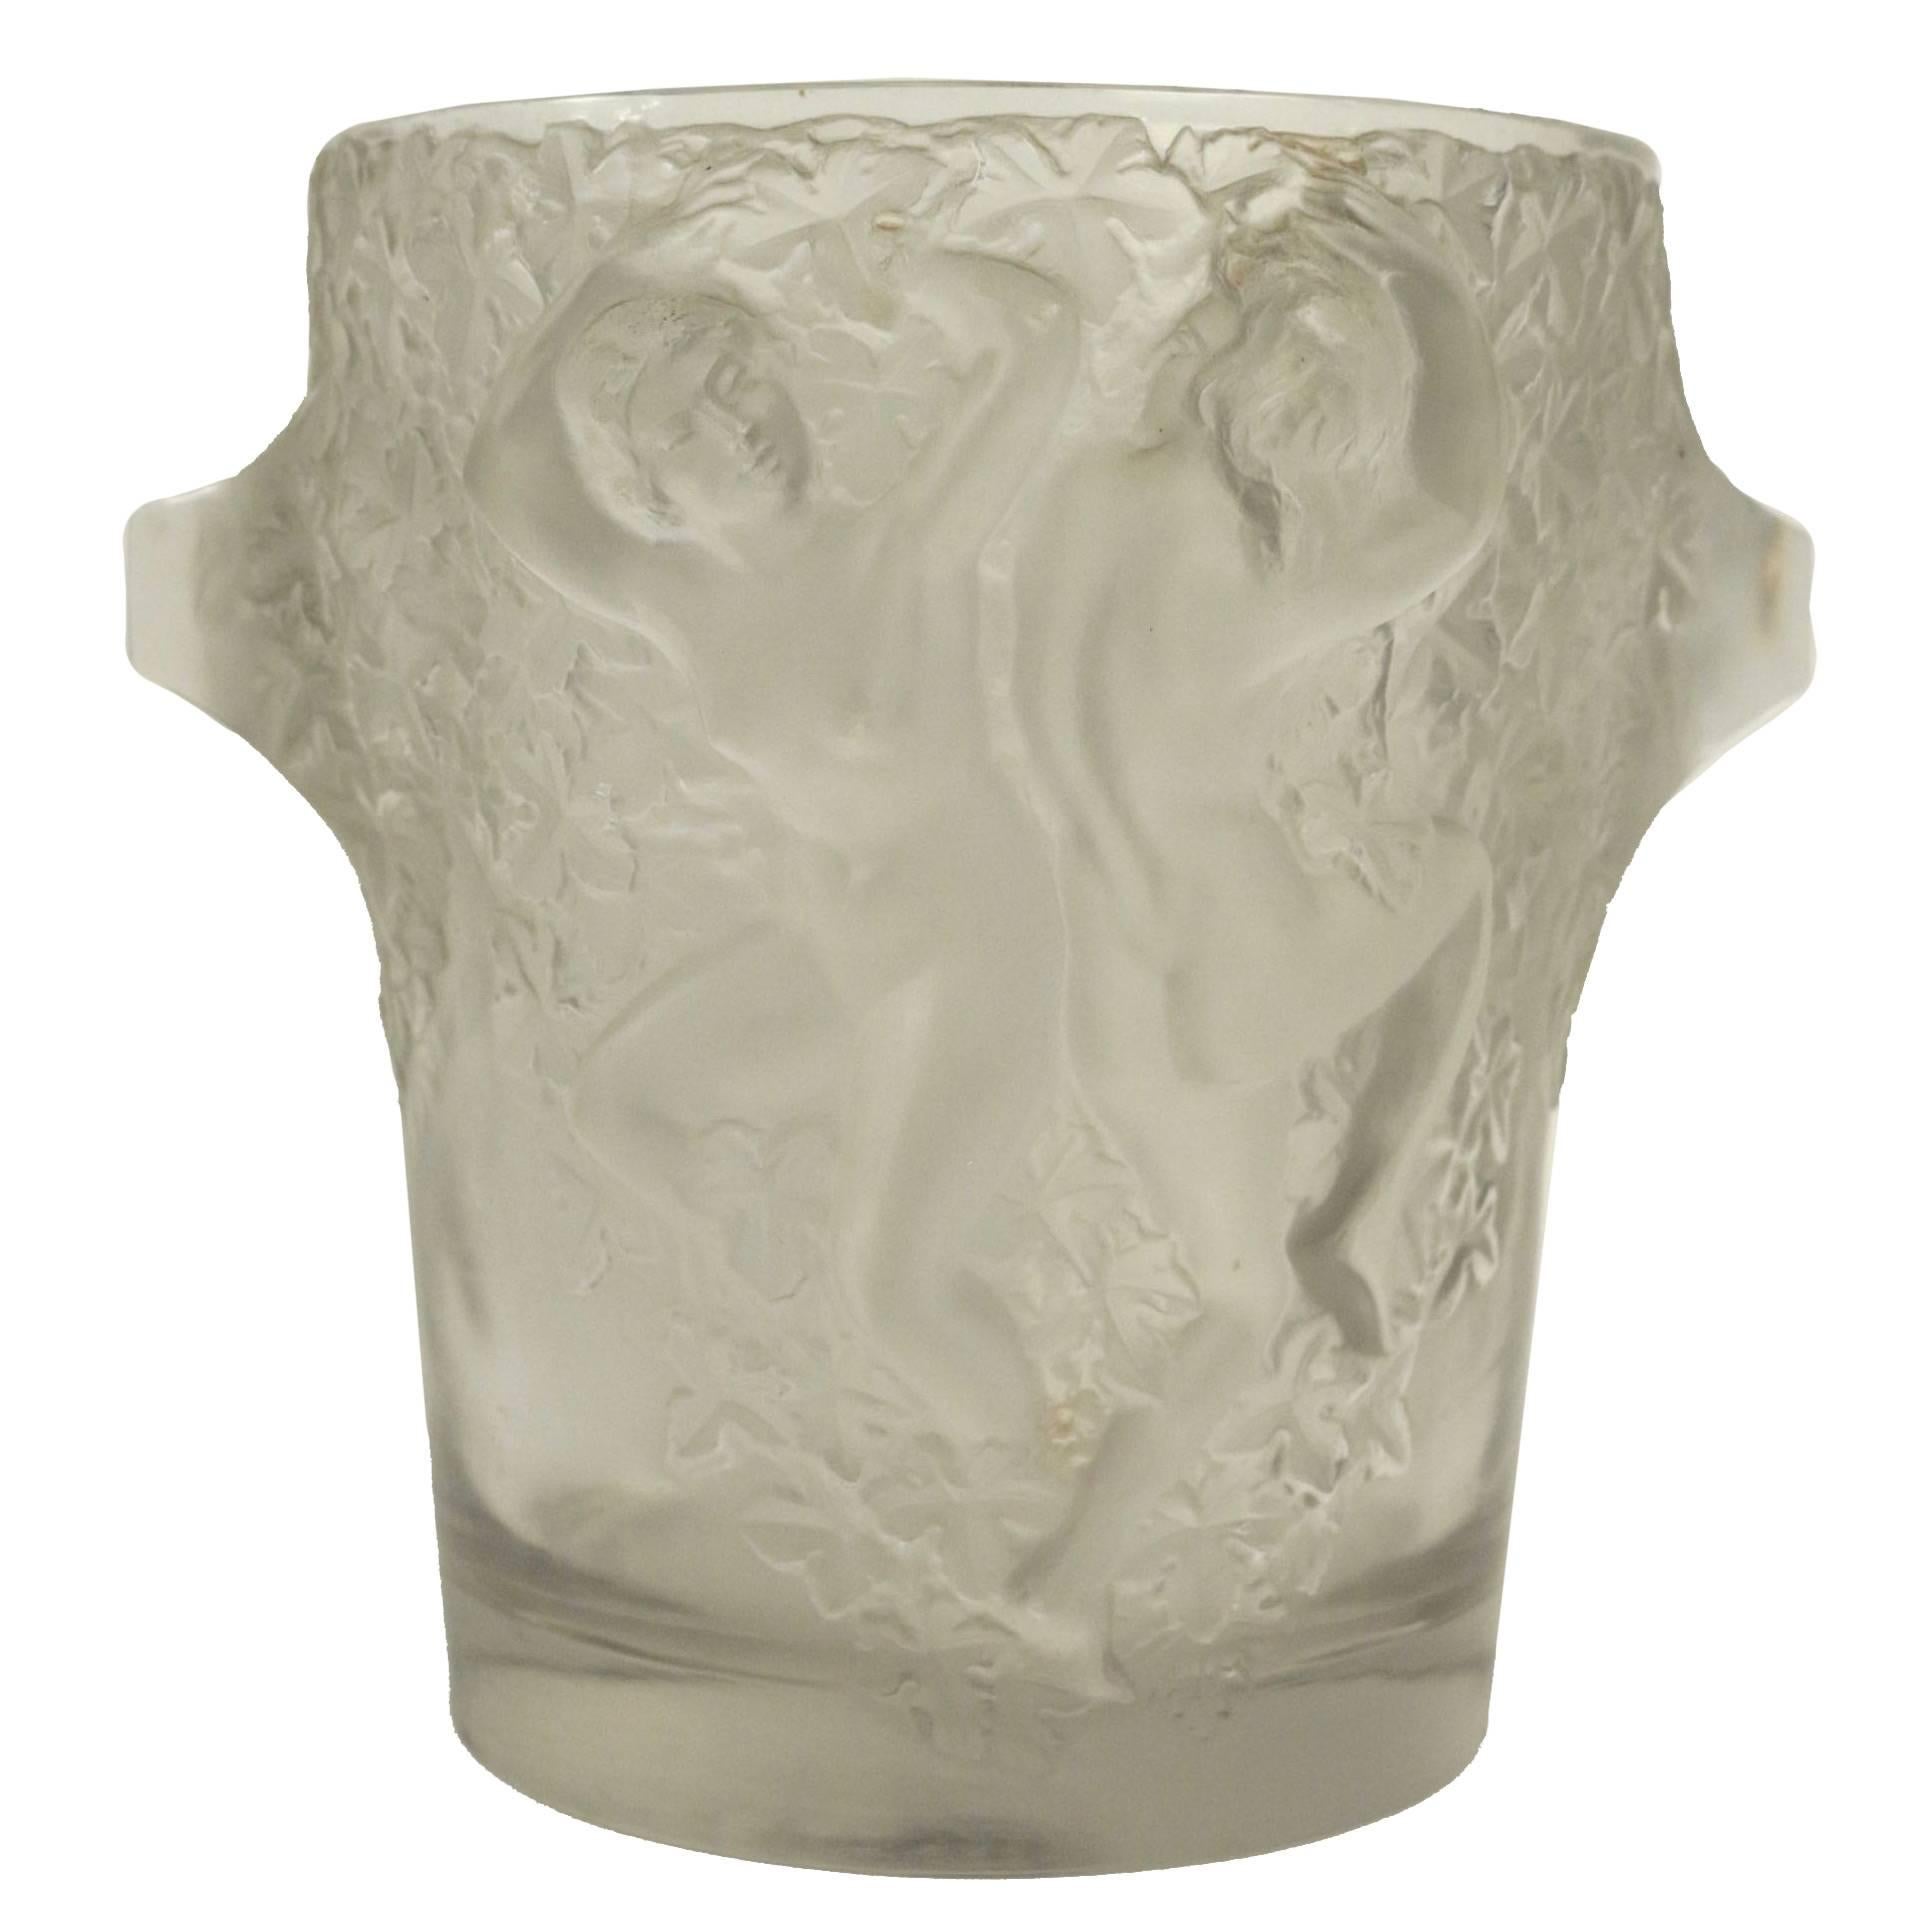 Lalique ice bucket depicting dancing female figures in high relief, circa 1938 design no. 11951. This piece is a perfect example of Lalique's Classic quest for elegant simplicity.
Signed Lalique France on bottom. Measures: 9 1/8